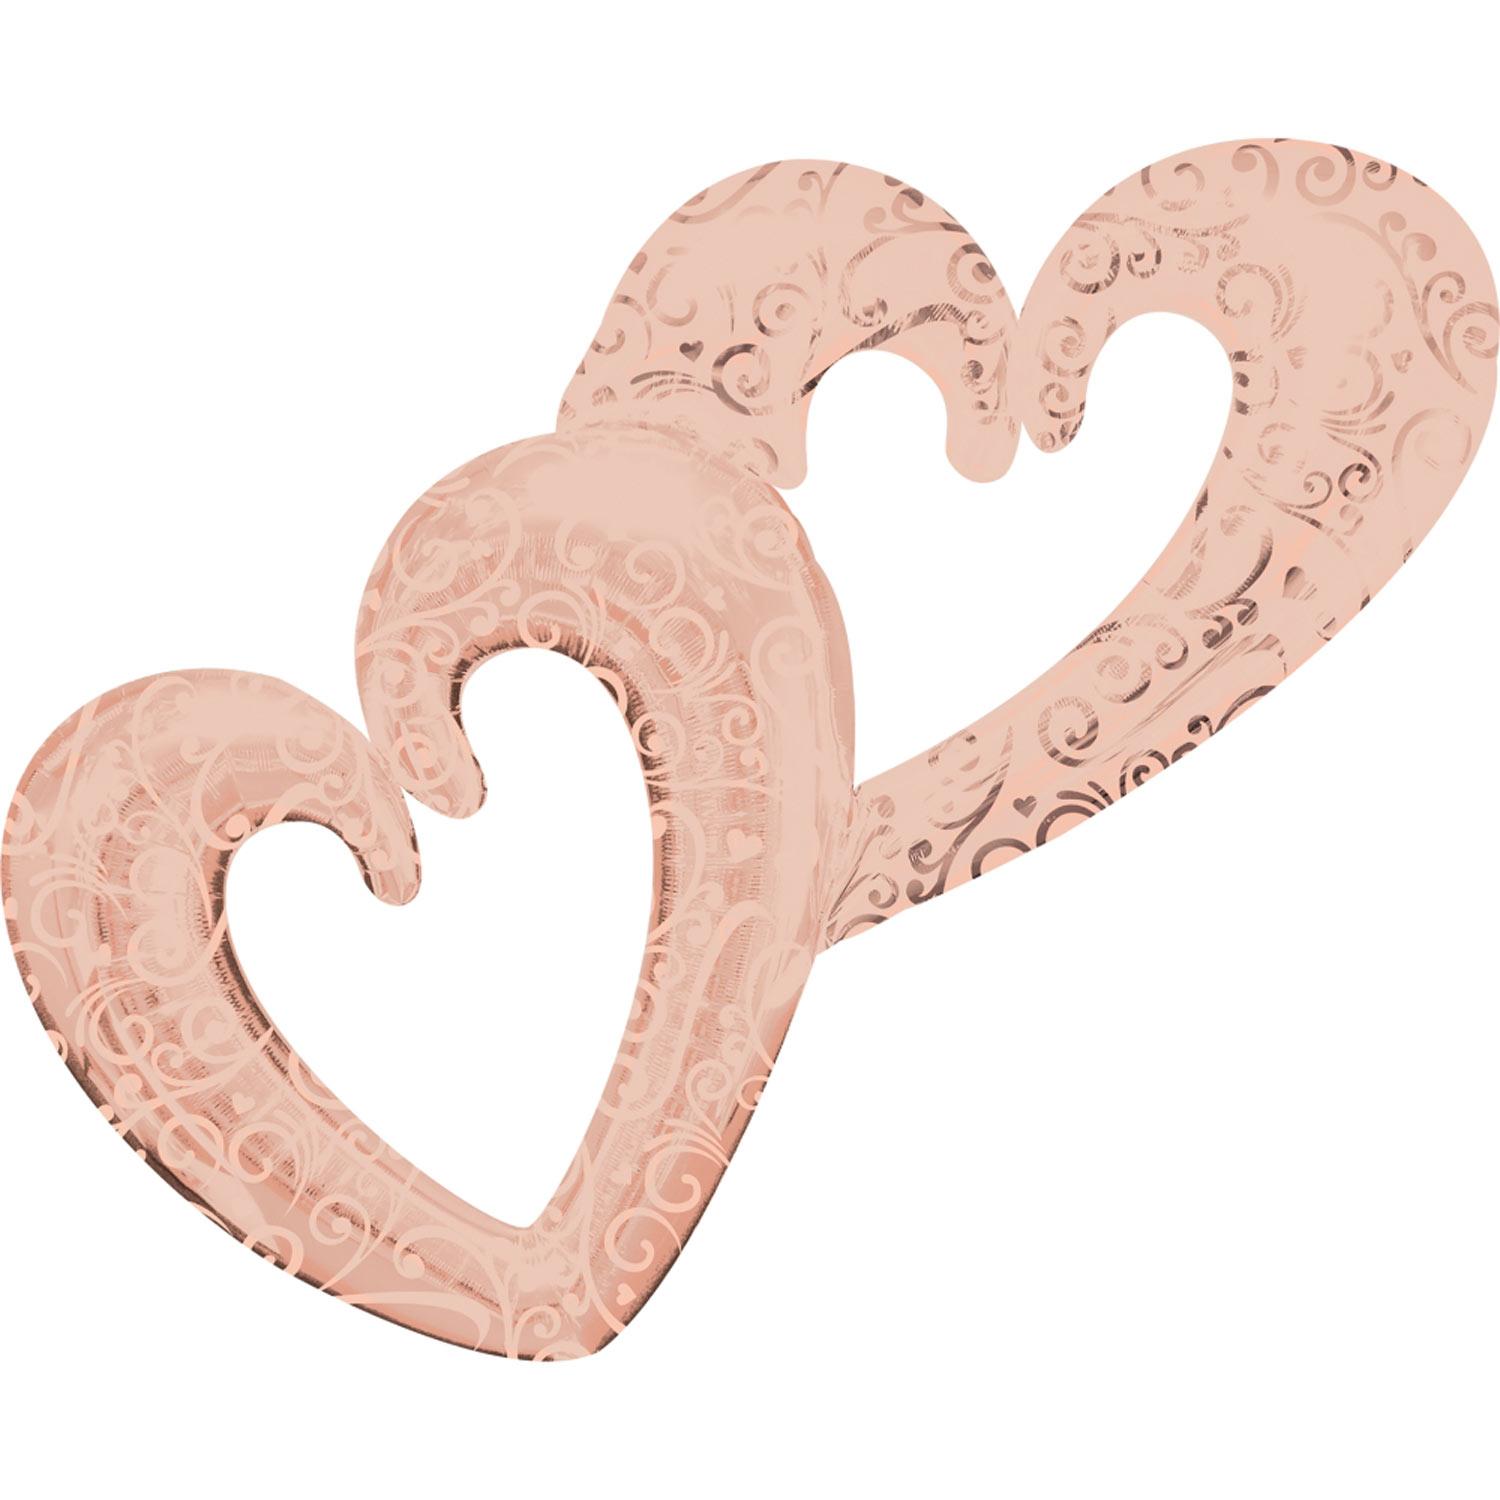 Intelocking Hearts Rose Gold Multi-Balloon 134x91cm Balloons & Streamers - Party Centre